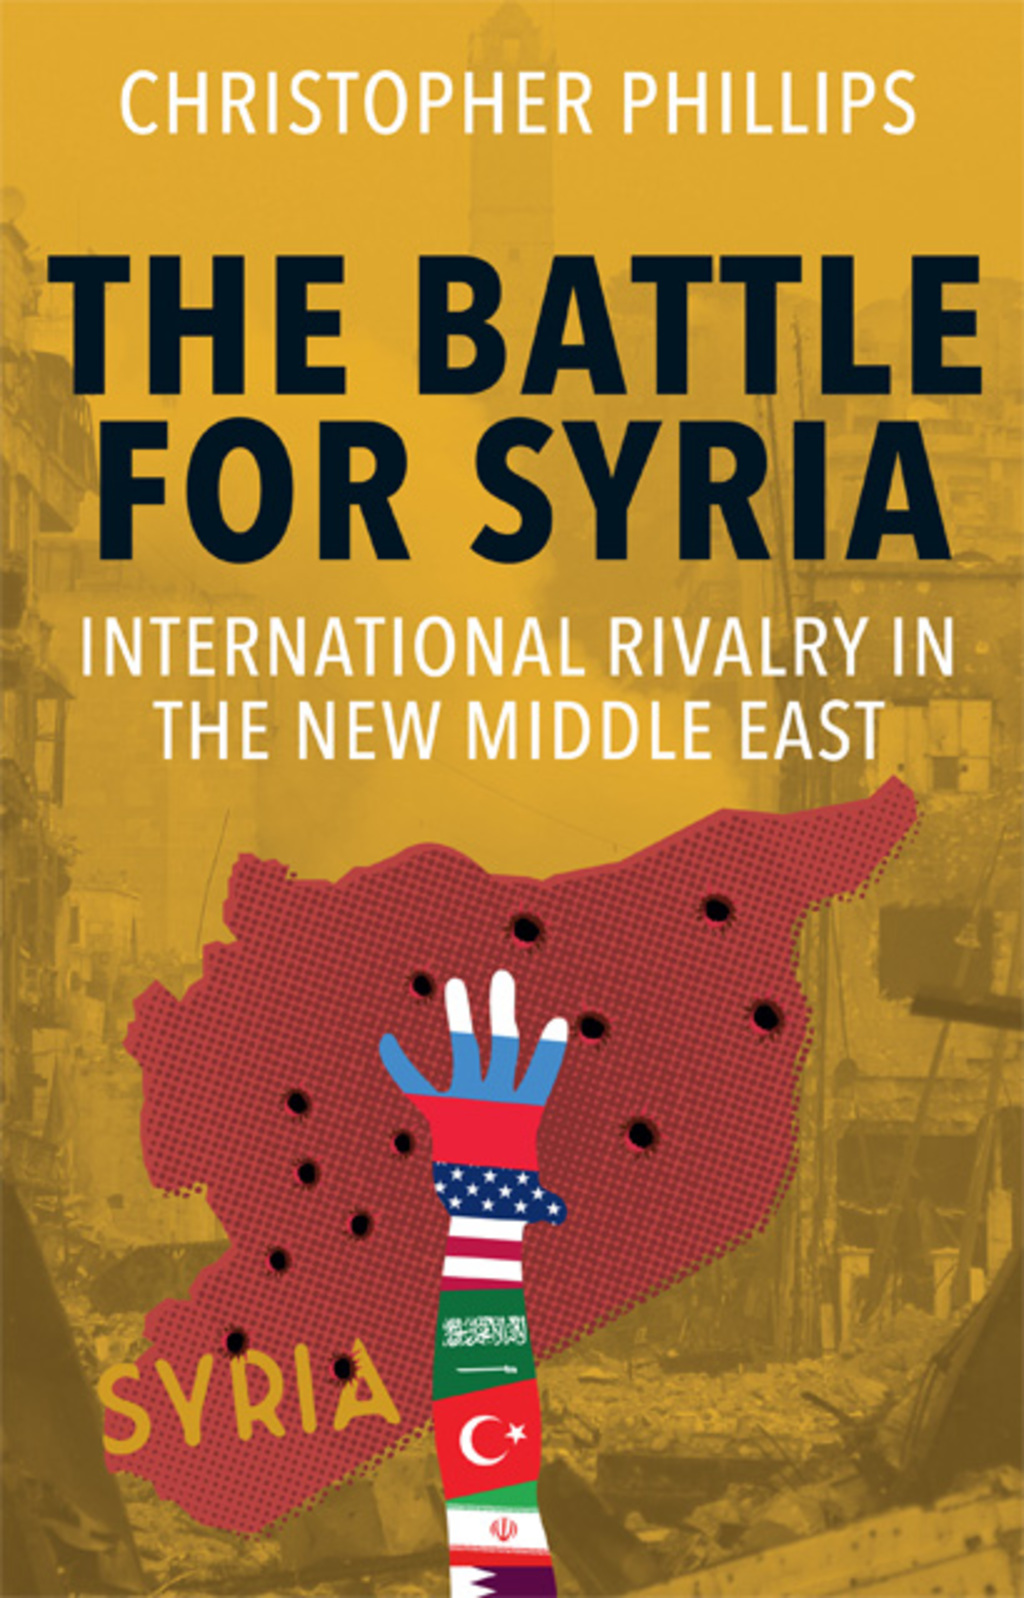 The Battle for Syria: International Rivalry in the New Middle East (eBook) - Christopher Phillips